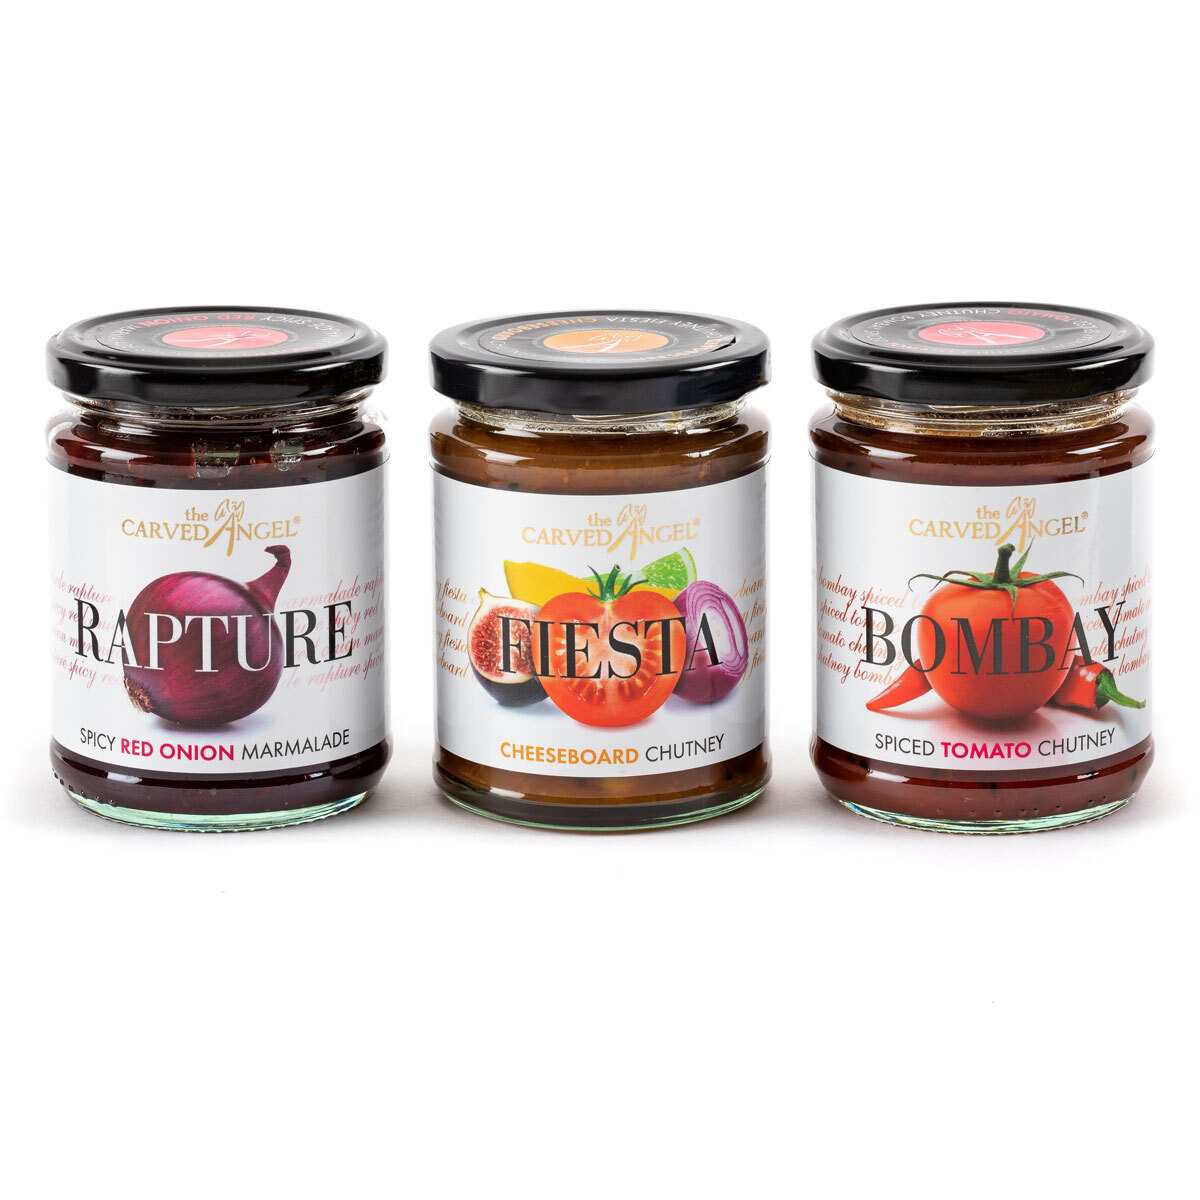 The Carved Angel Chutney Kings Assortment - Rapture, Fiesta and Bombay